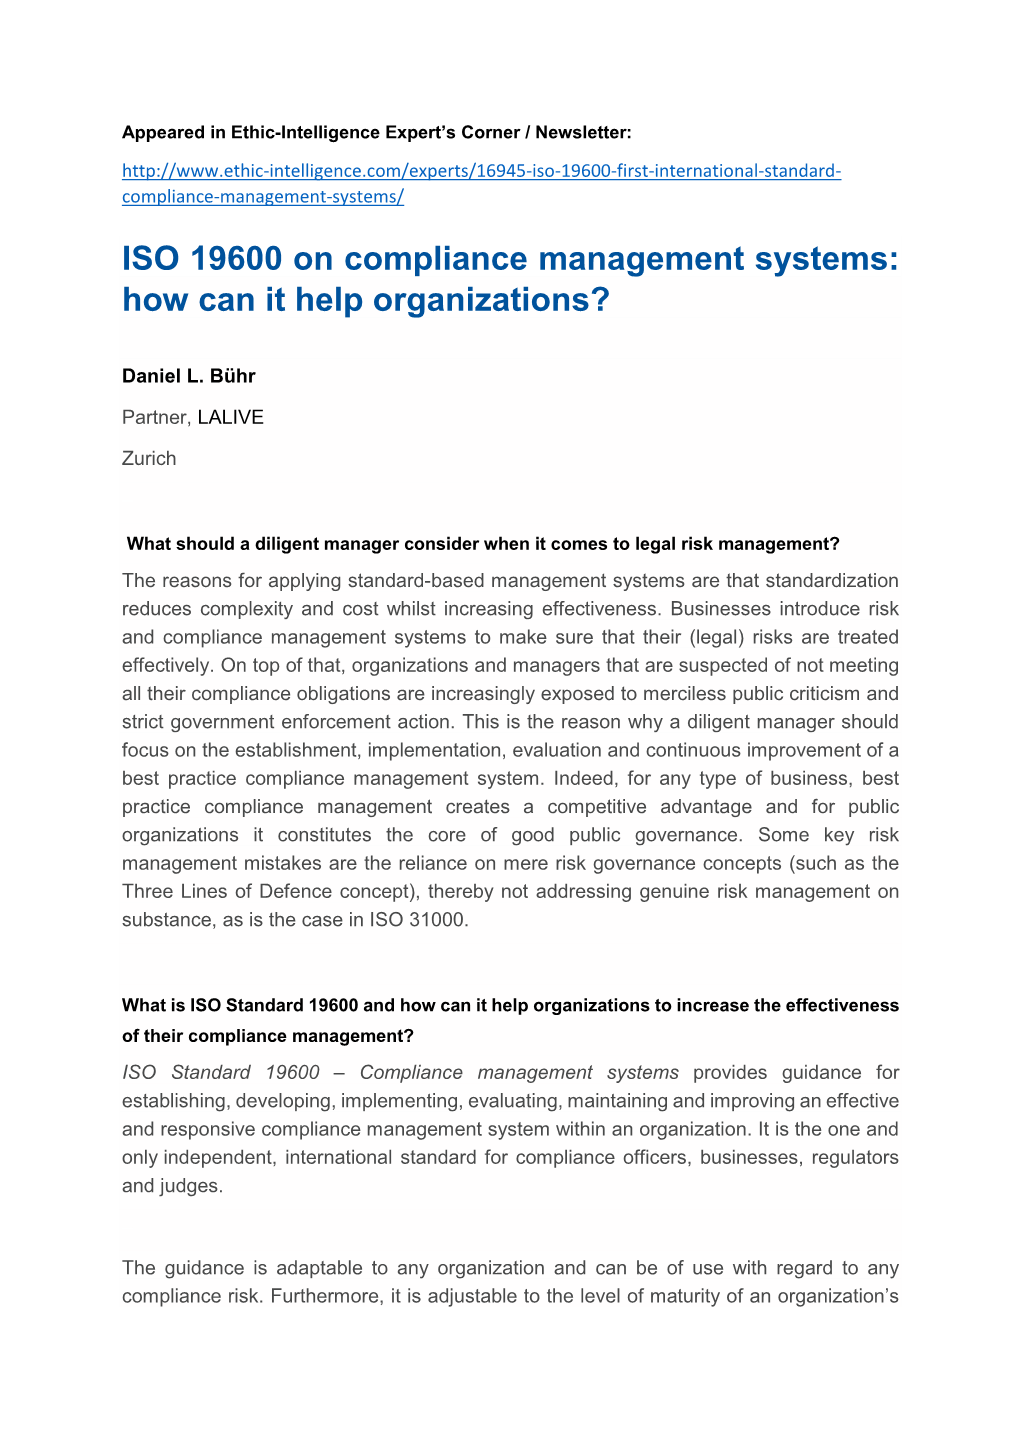 ISO 19600 on Compliance Management Systems: How Can It Help Organizations?